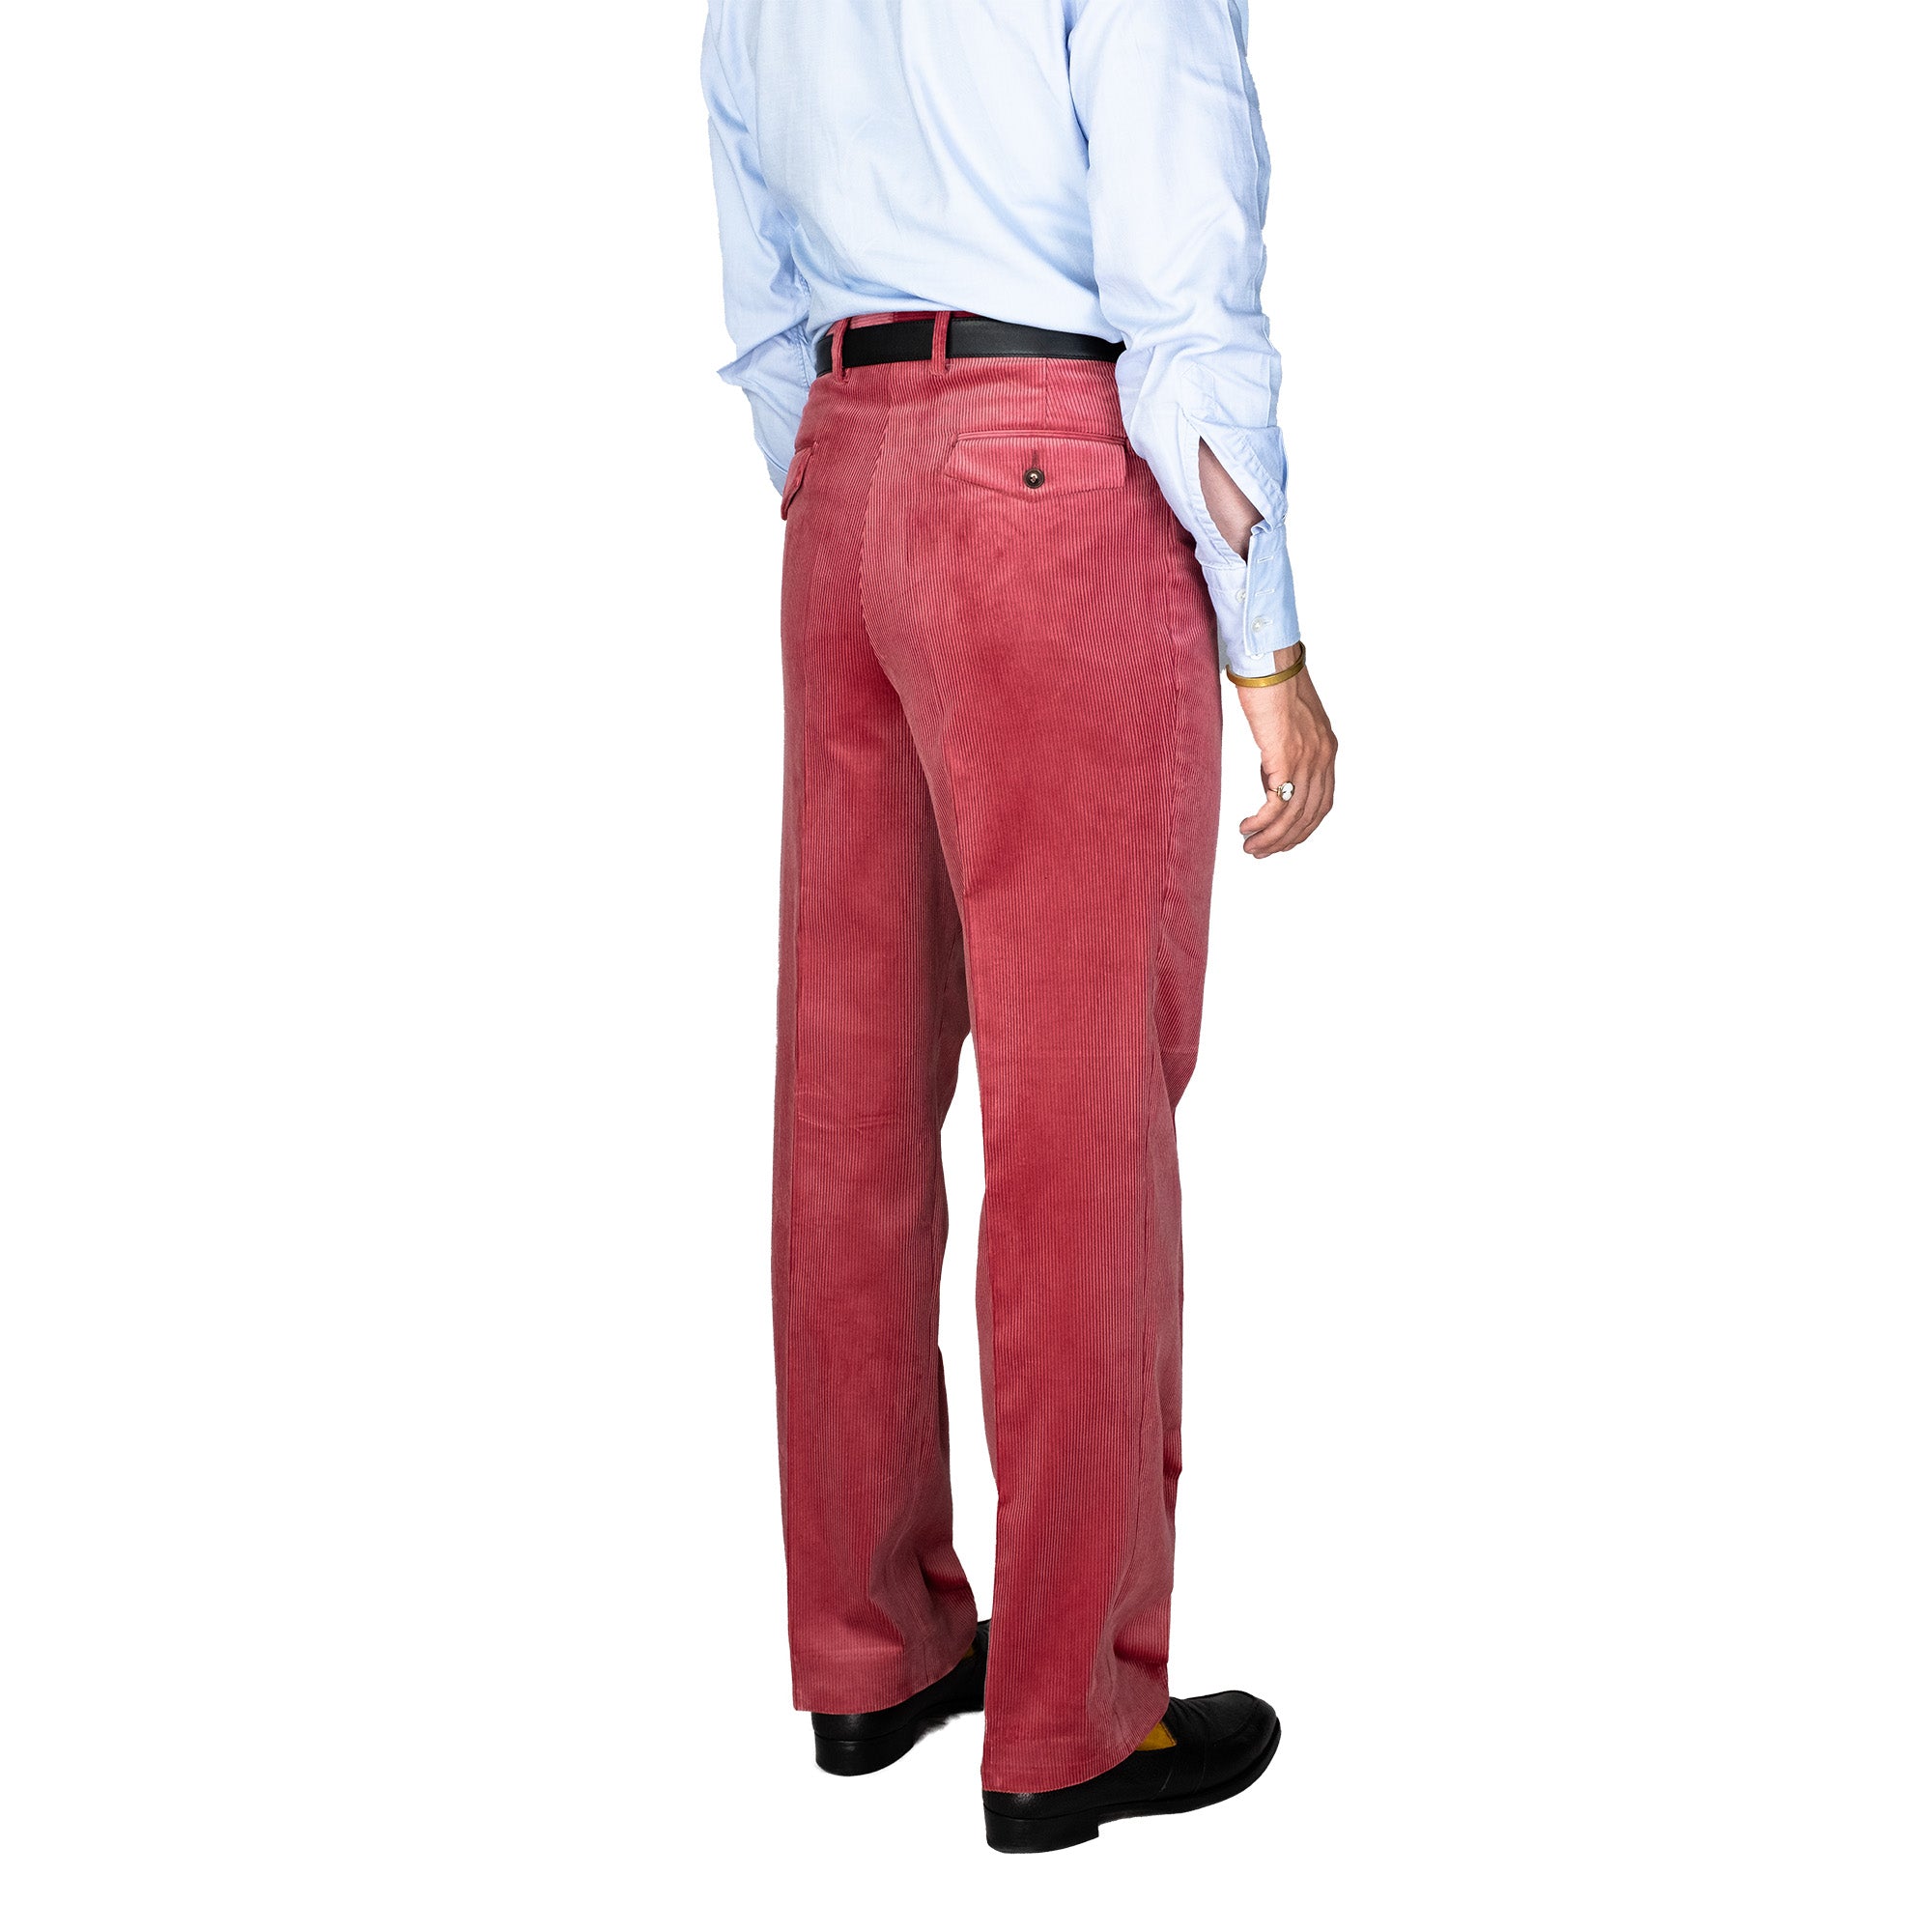 Trousers - Candy coral medium wale corduroy